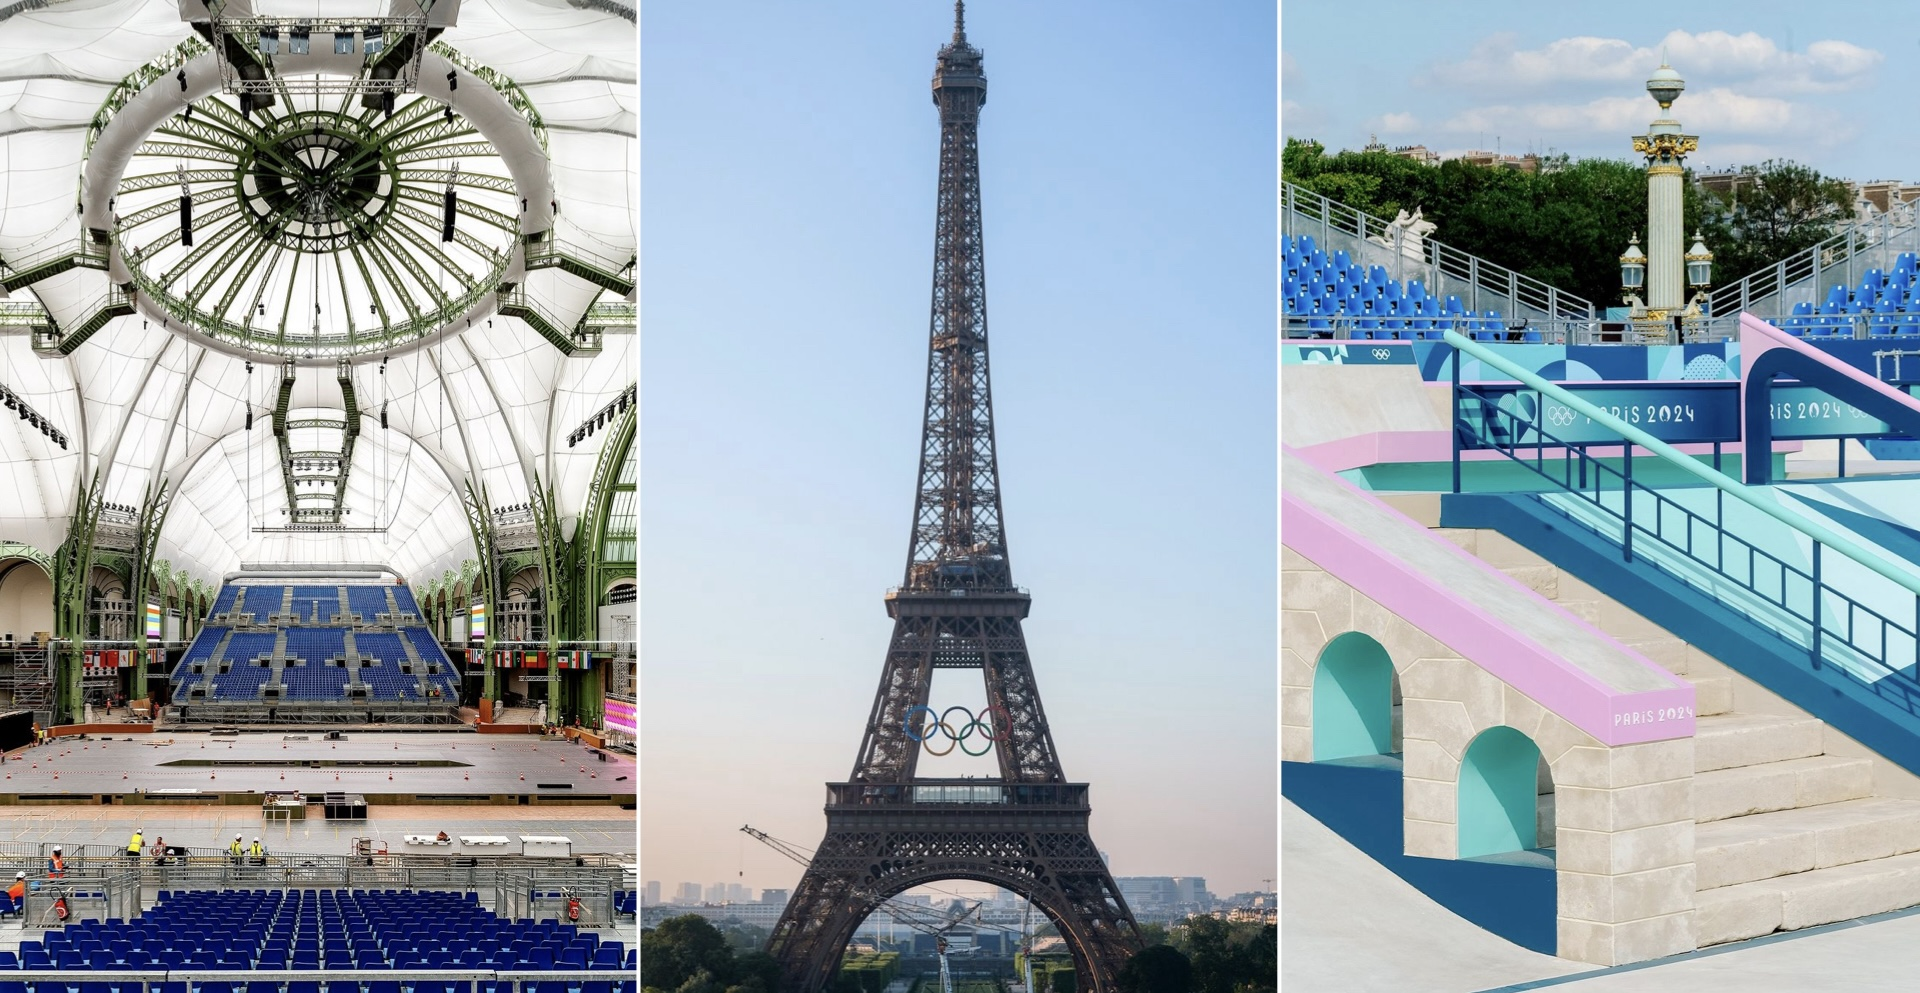 Olympic 2024: The atmosphere in Paris ahead of the Olympic 2024